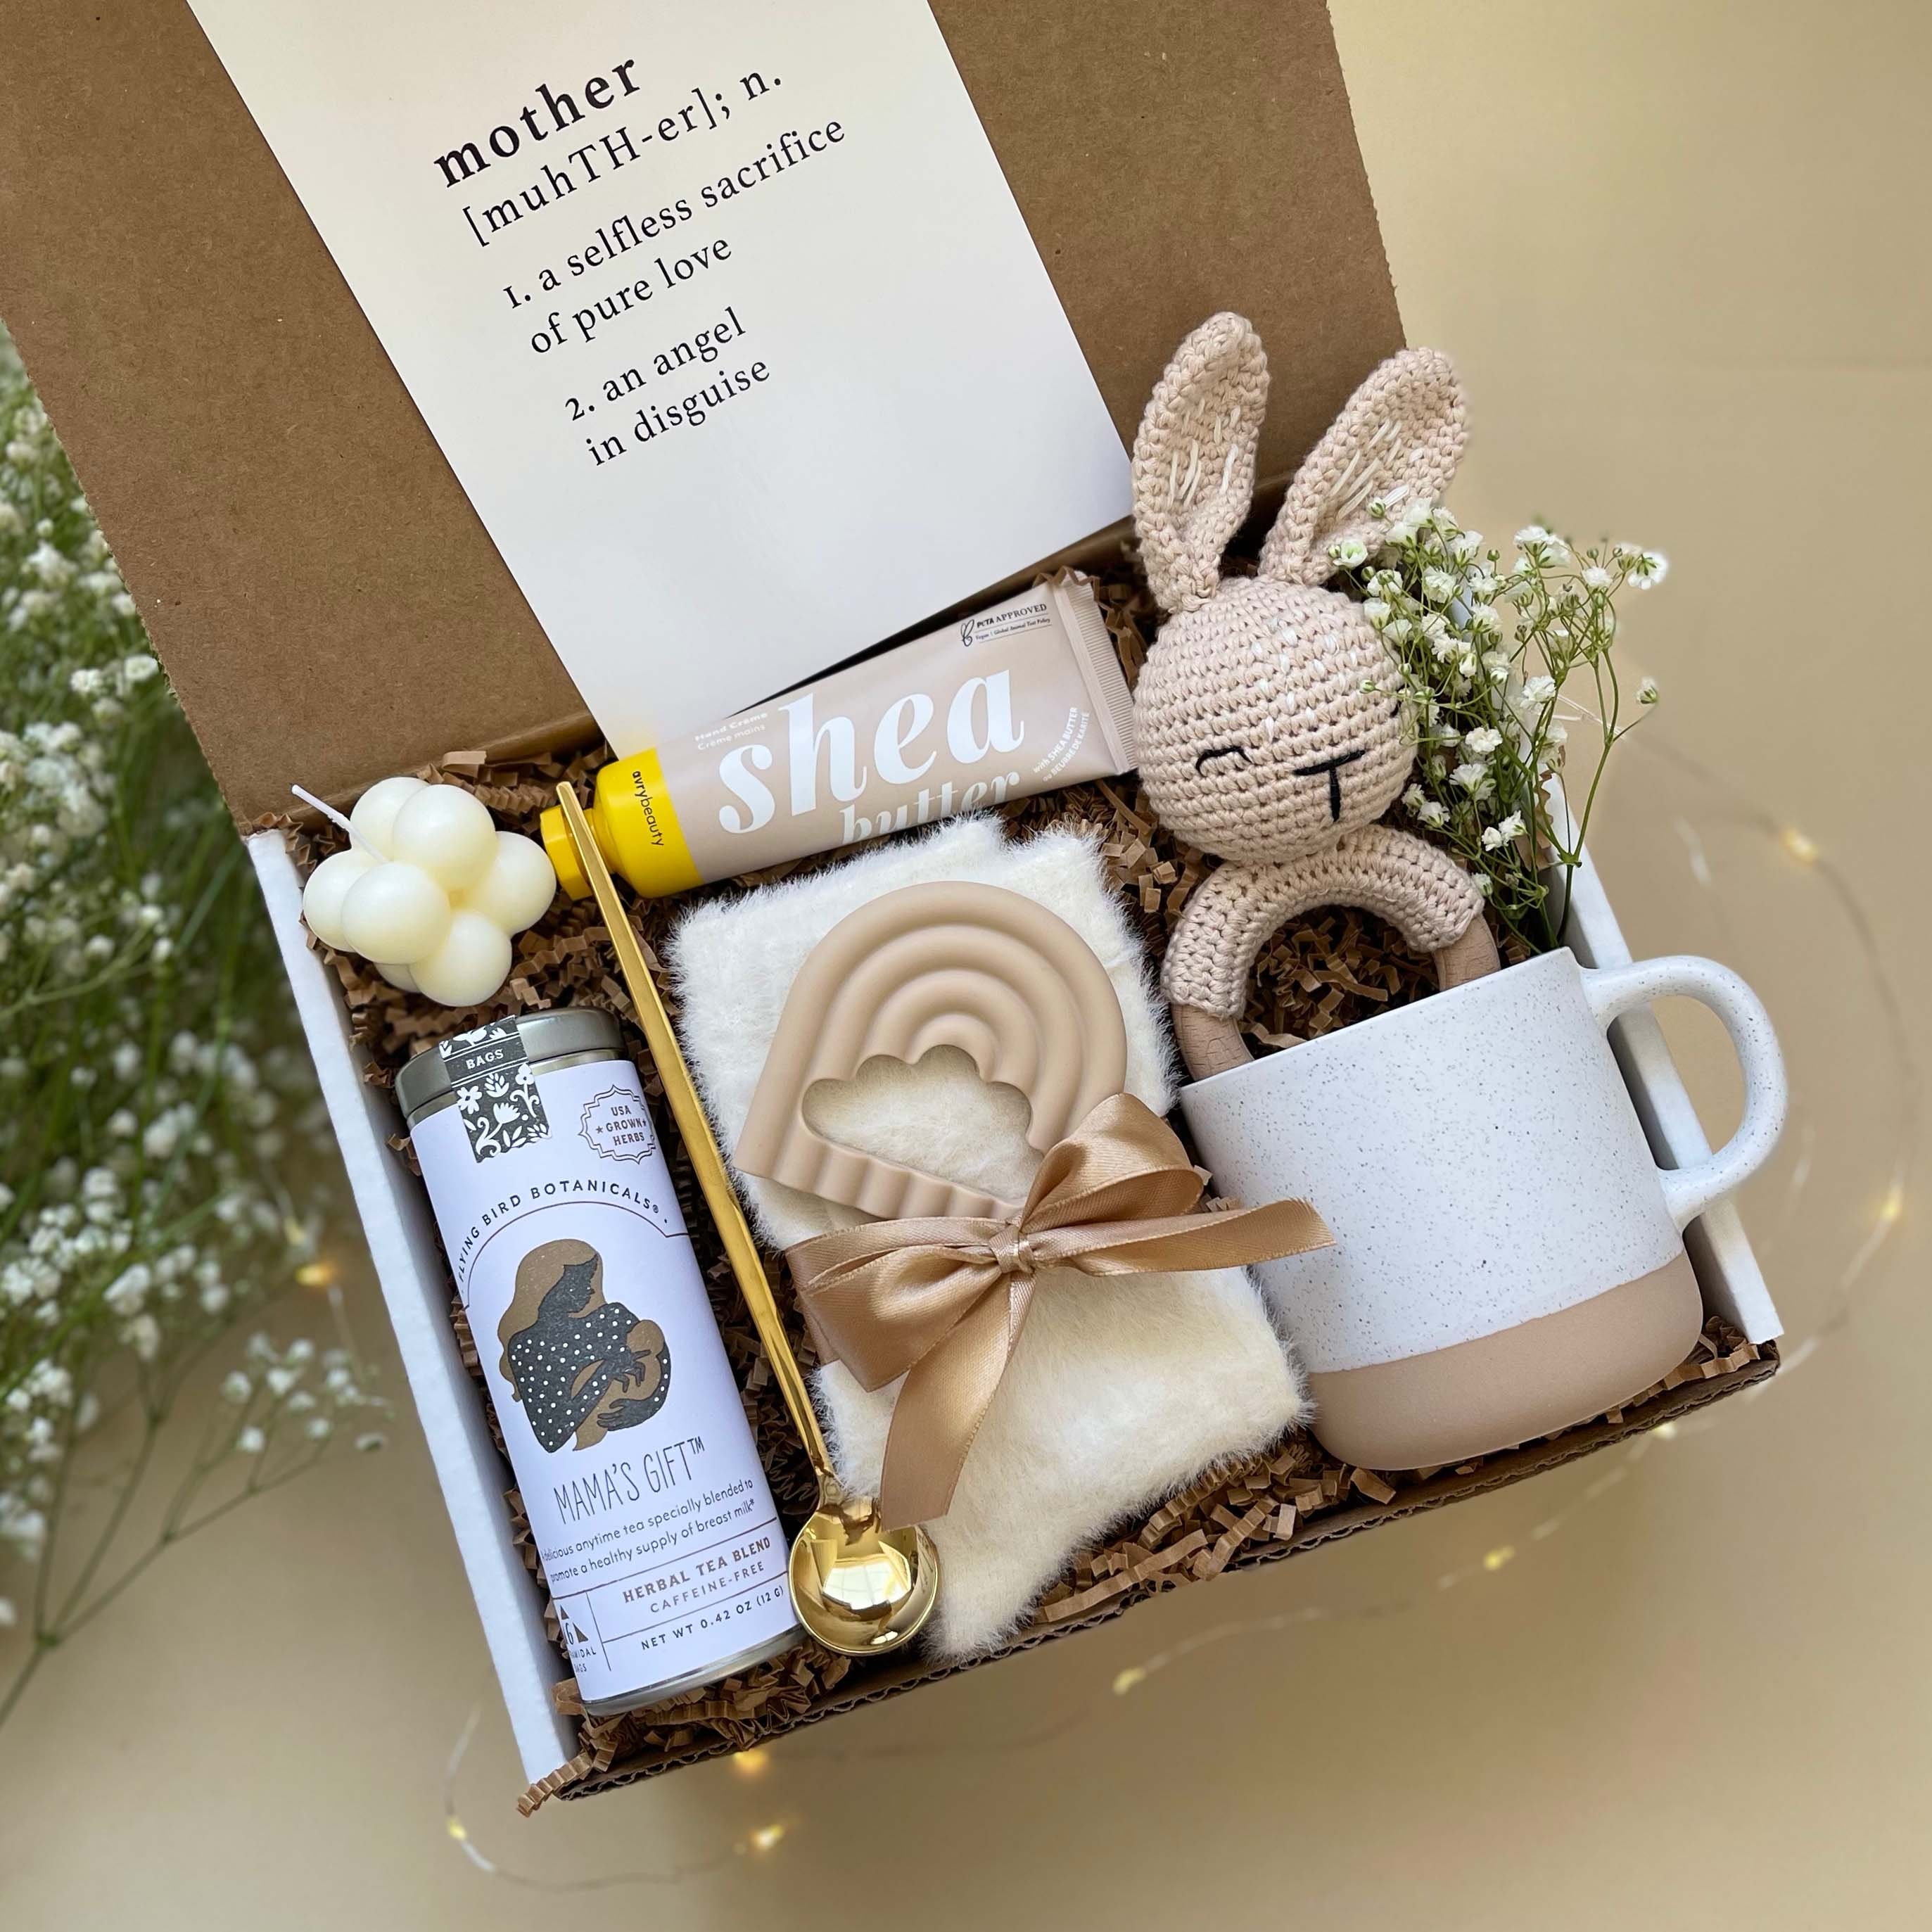 Postpartum Recovery Gift Box  New Mom Care Package — NURTURED 9